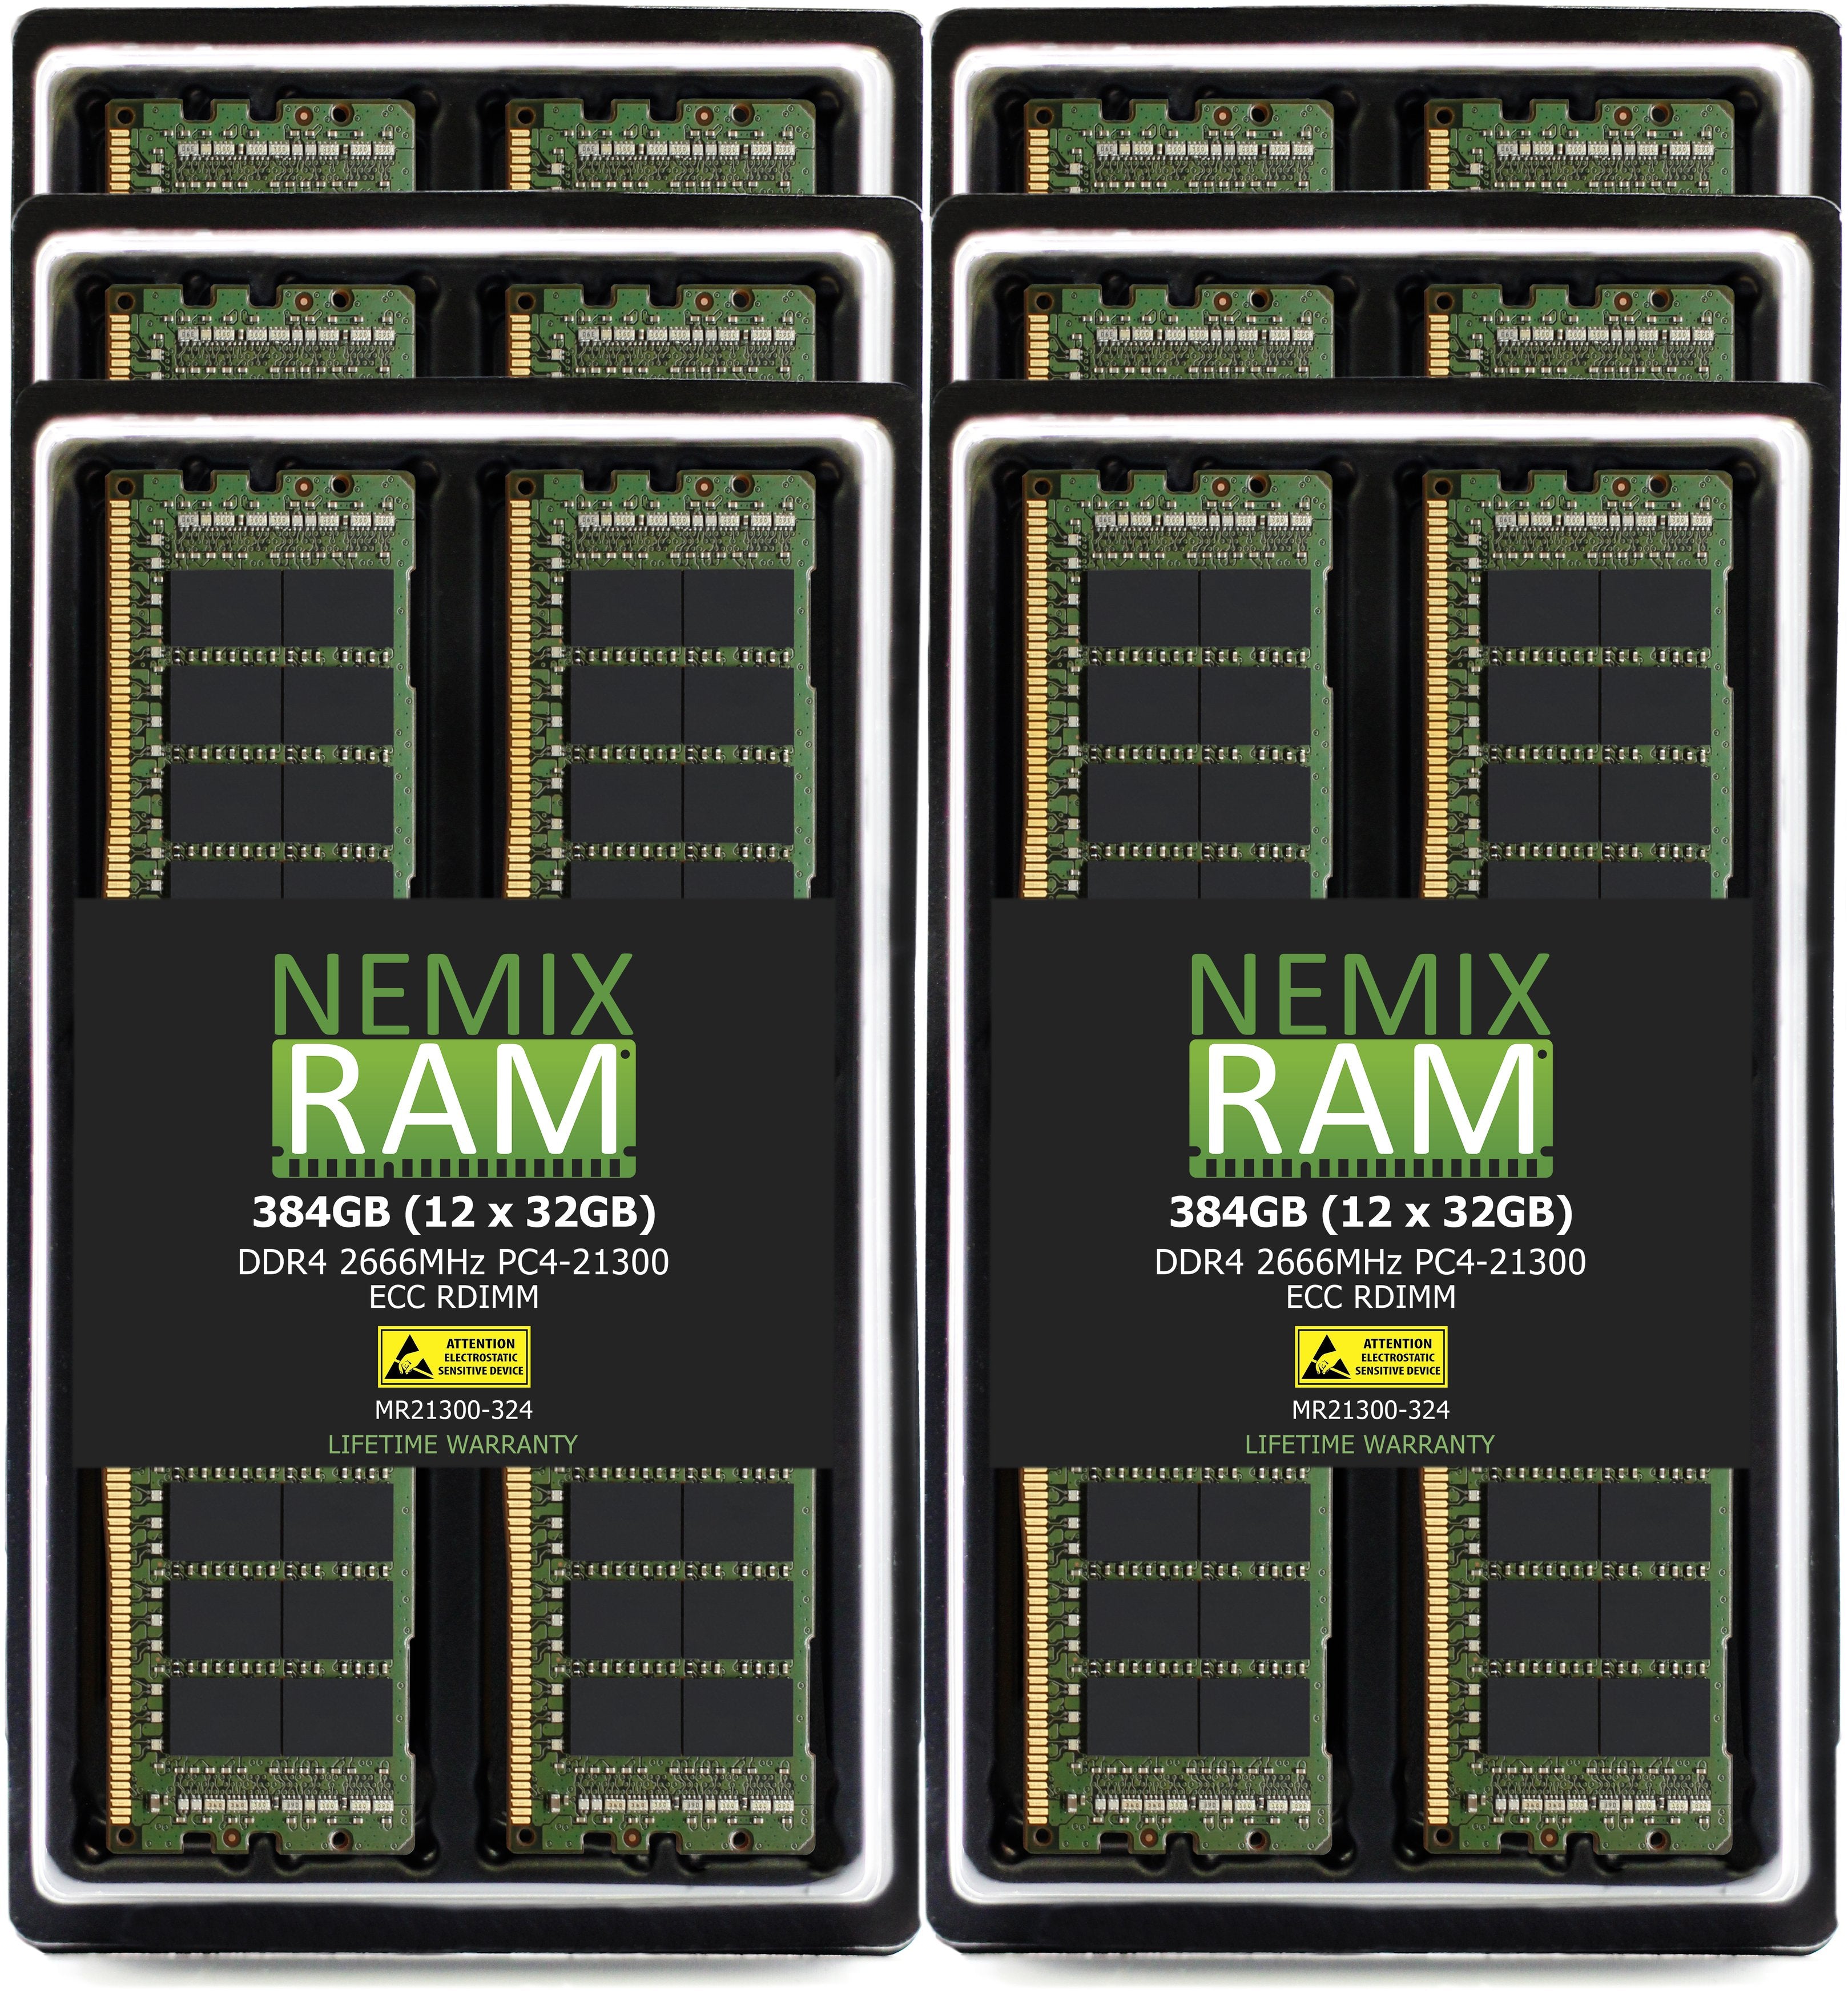 DDR4 2666MHZ PC4-21300 RDIMM for Apple Mac Pro Rack 2020 7,1 8-core